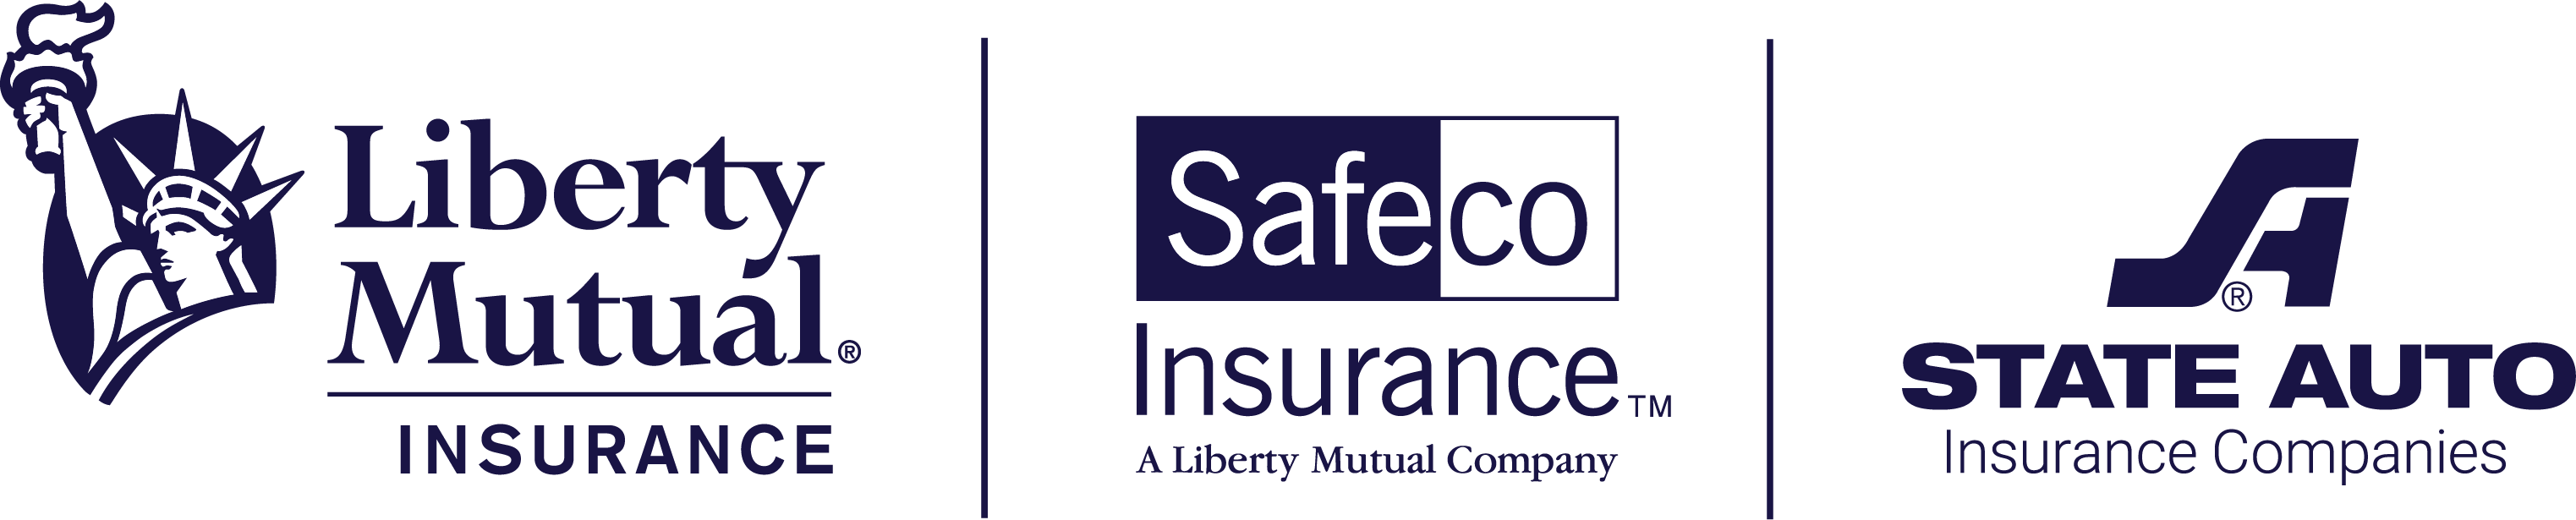 Liberty Mutual_Safeco_State Auto (Presidential).png